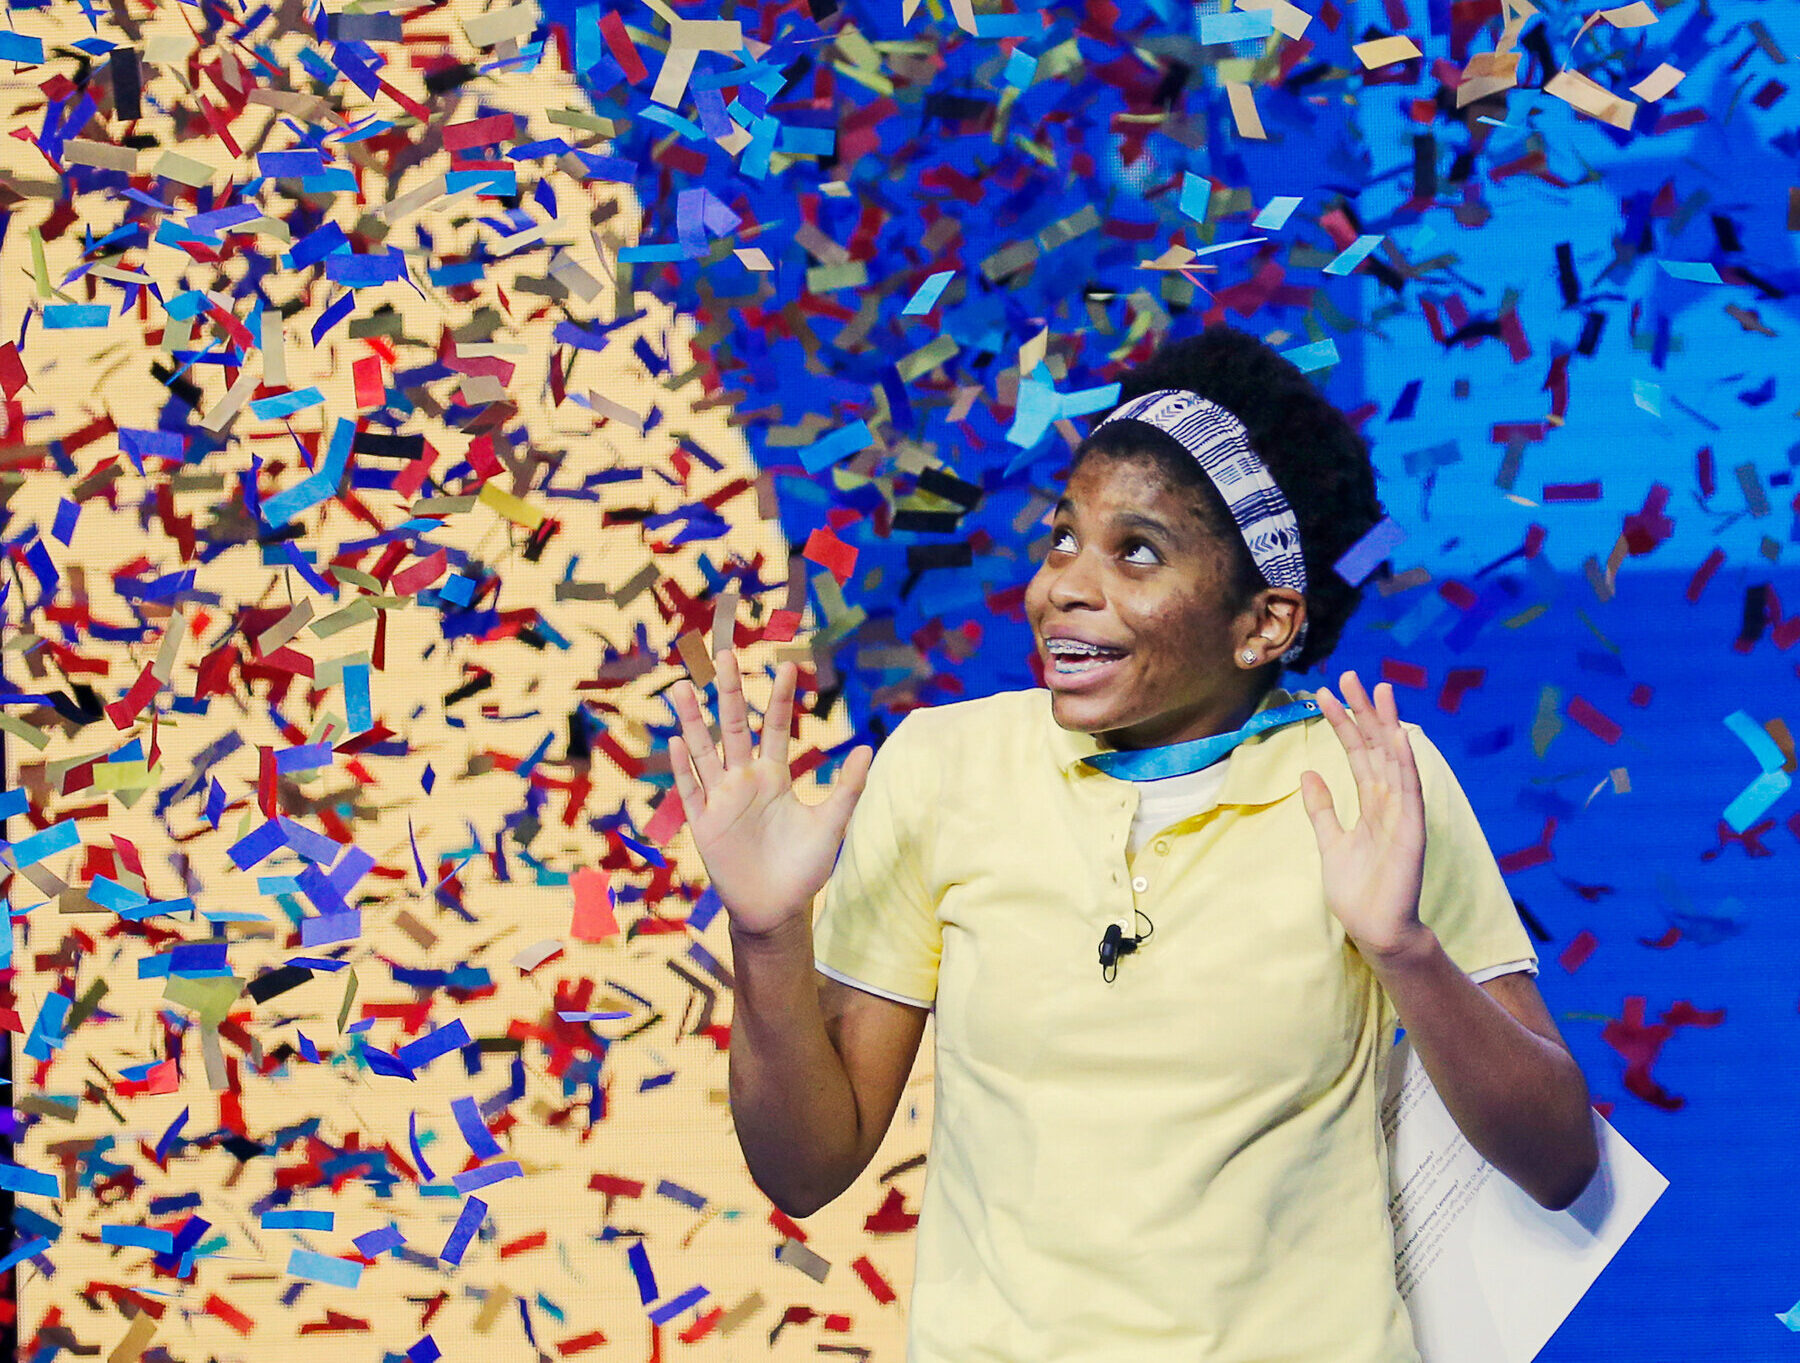 Zaila Avant-garde Becomes the First African American to Win National Spelling Bee